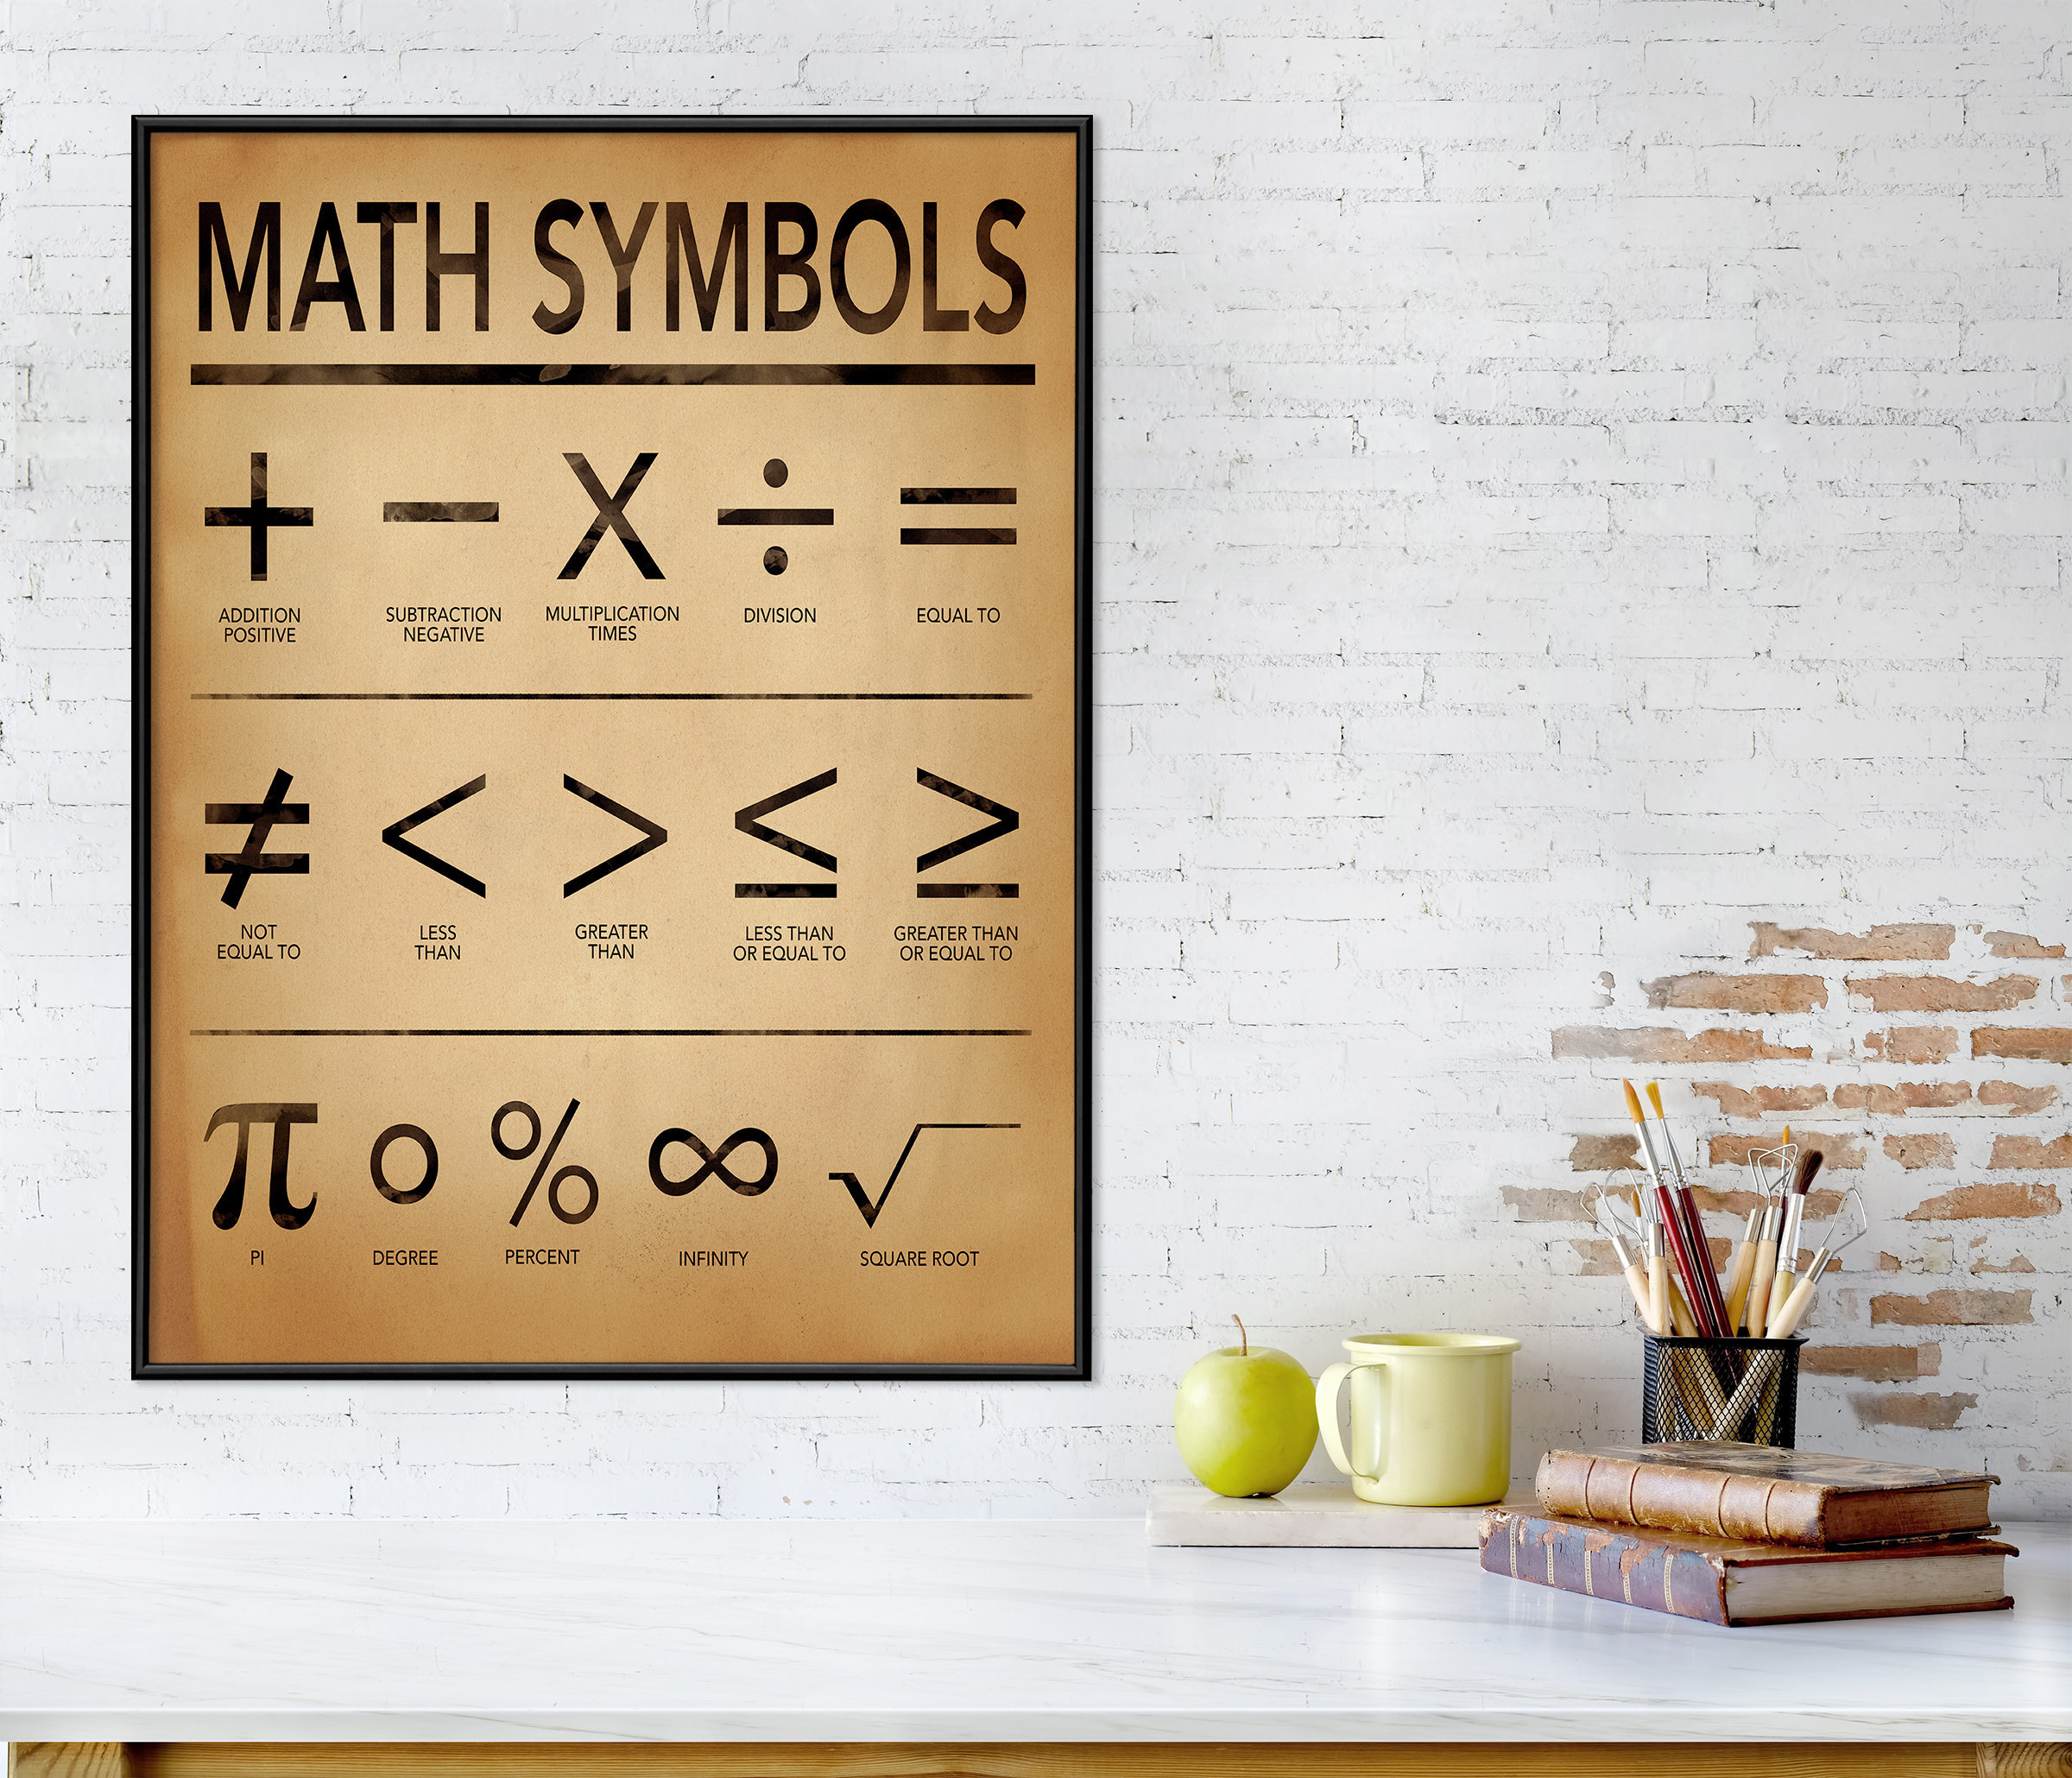 Math Symbols Art Print for Home Office or Classroom